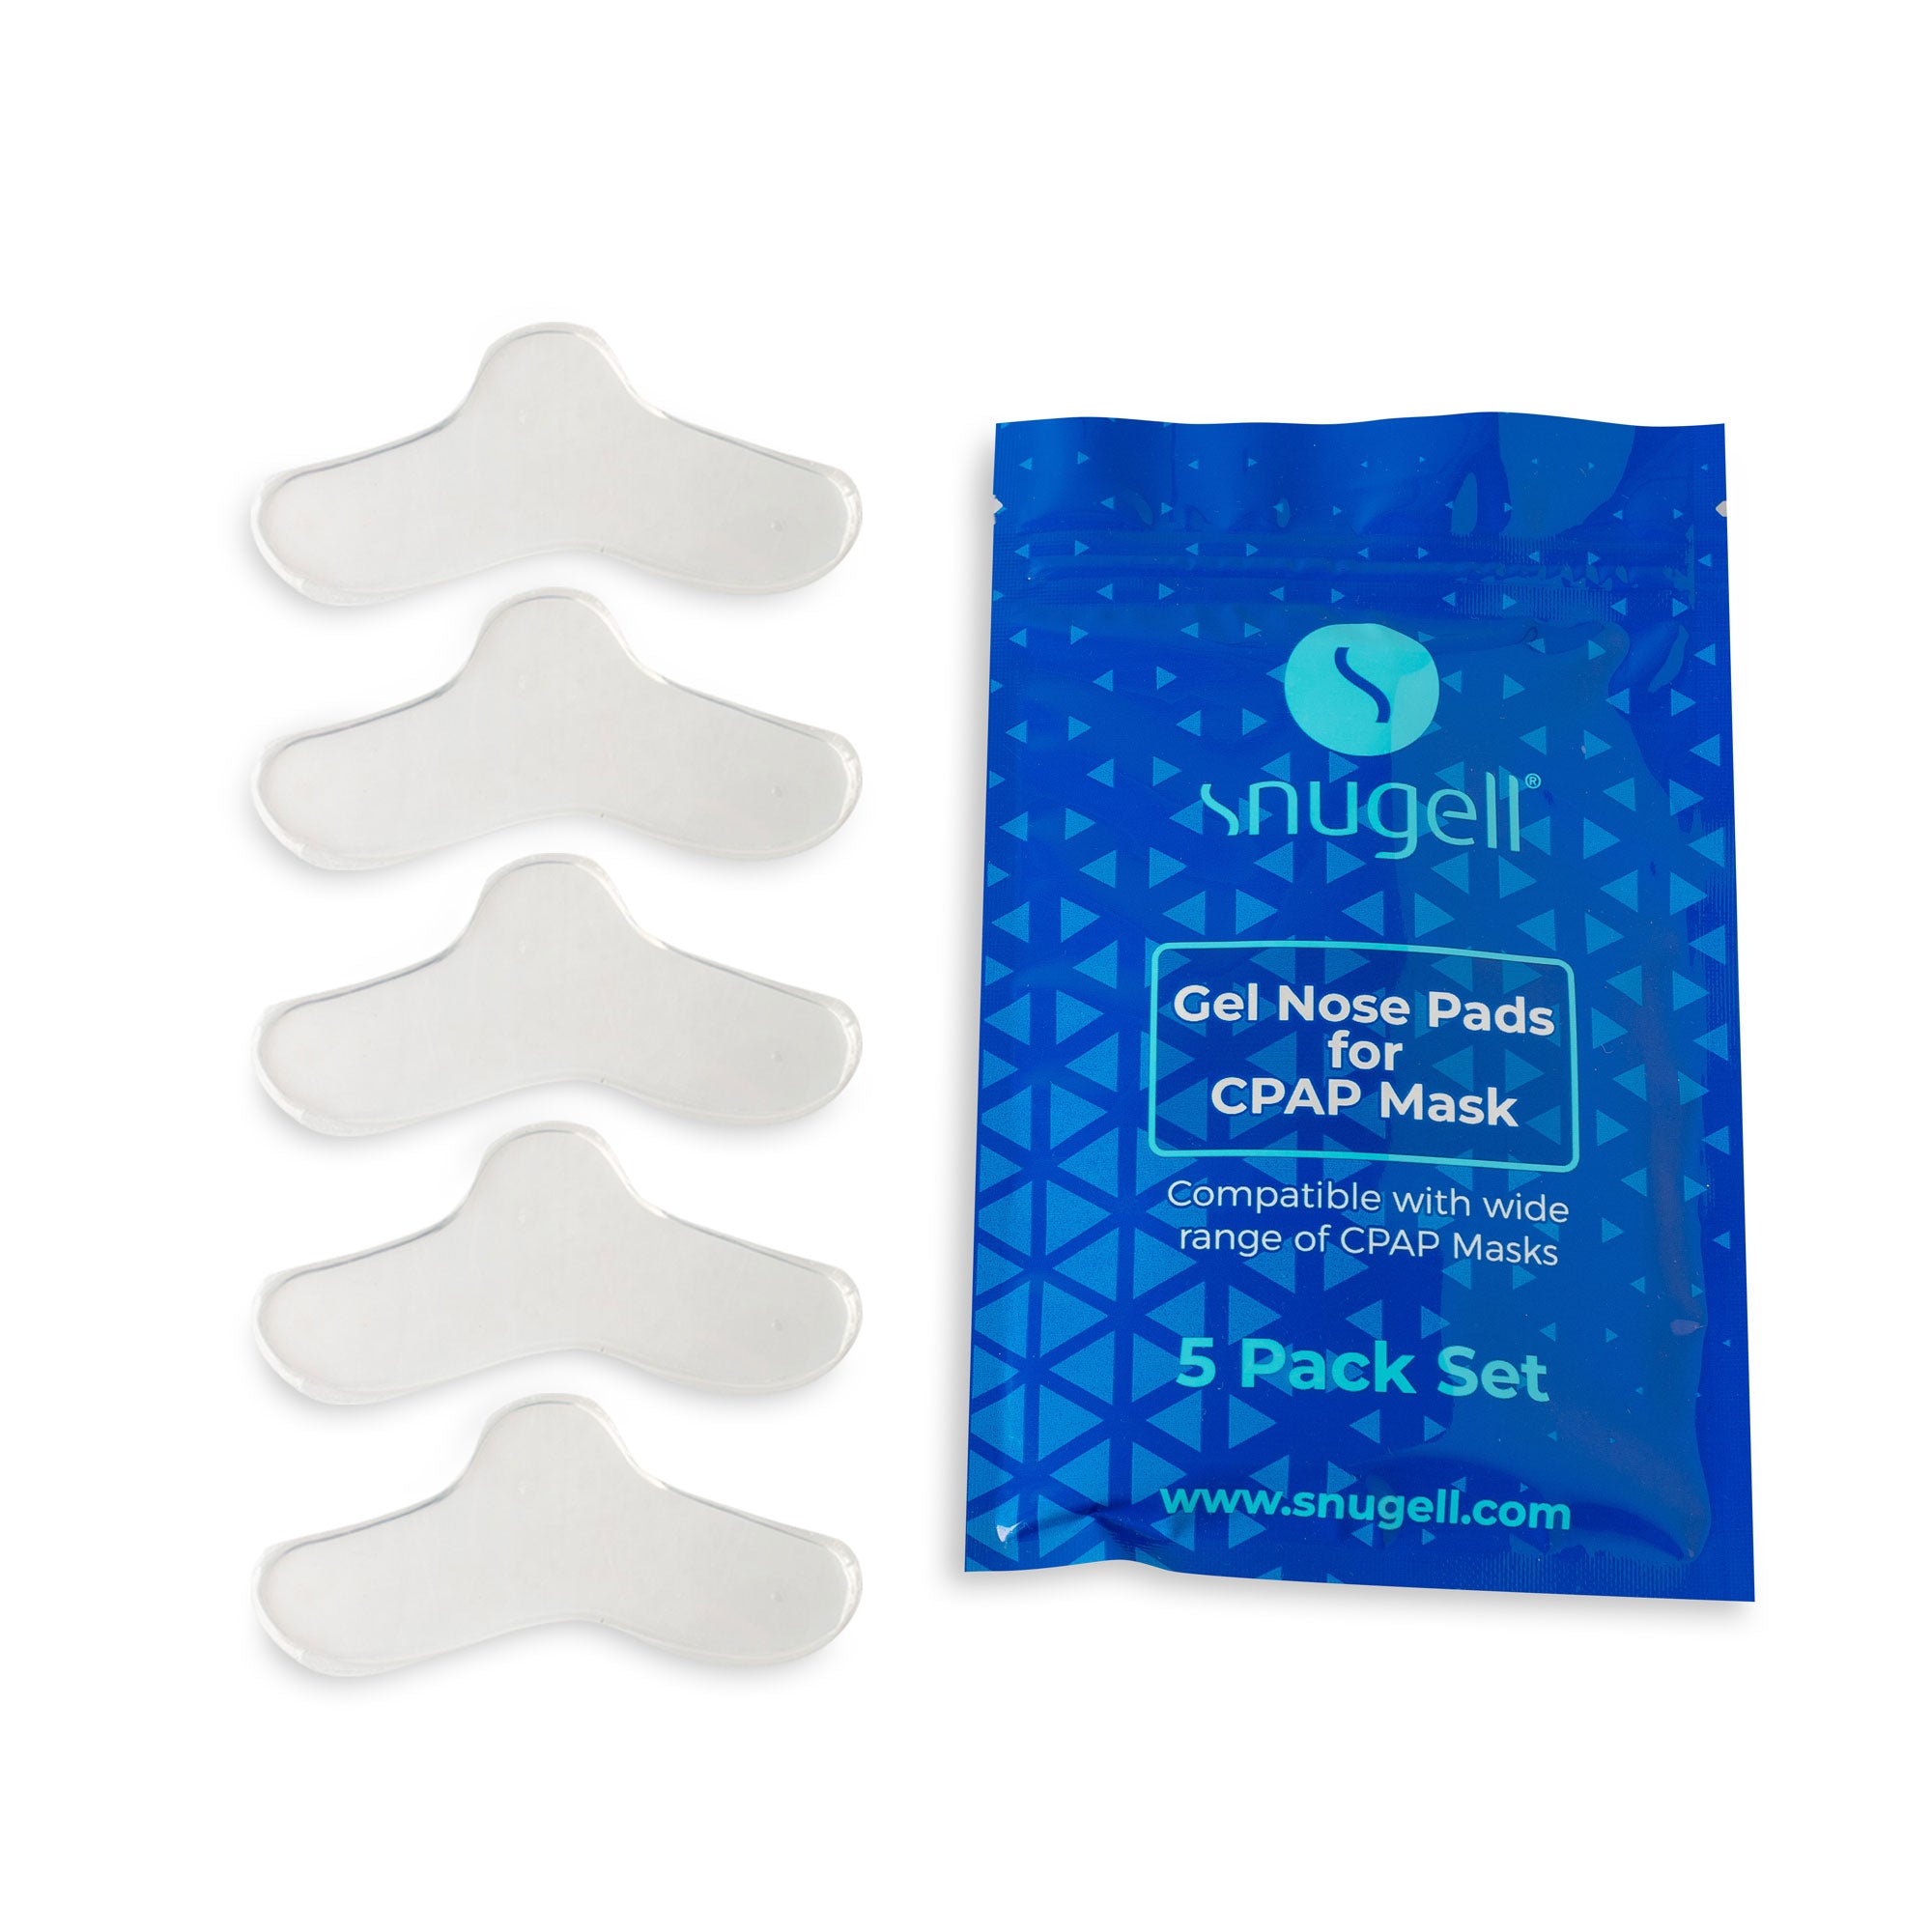 M.B. Leaf 2 Pack CPAP Nose Gel Pad - Nose Protector for Mask (Small - Case of 2) Nose Pads